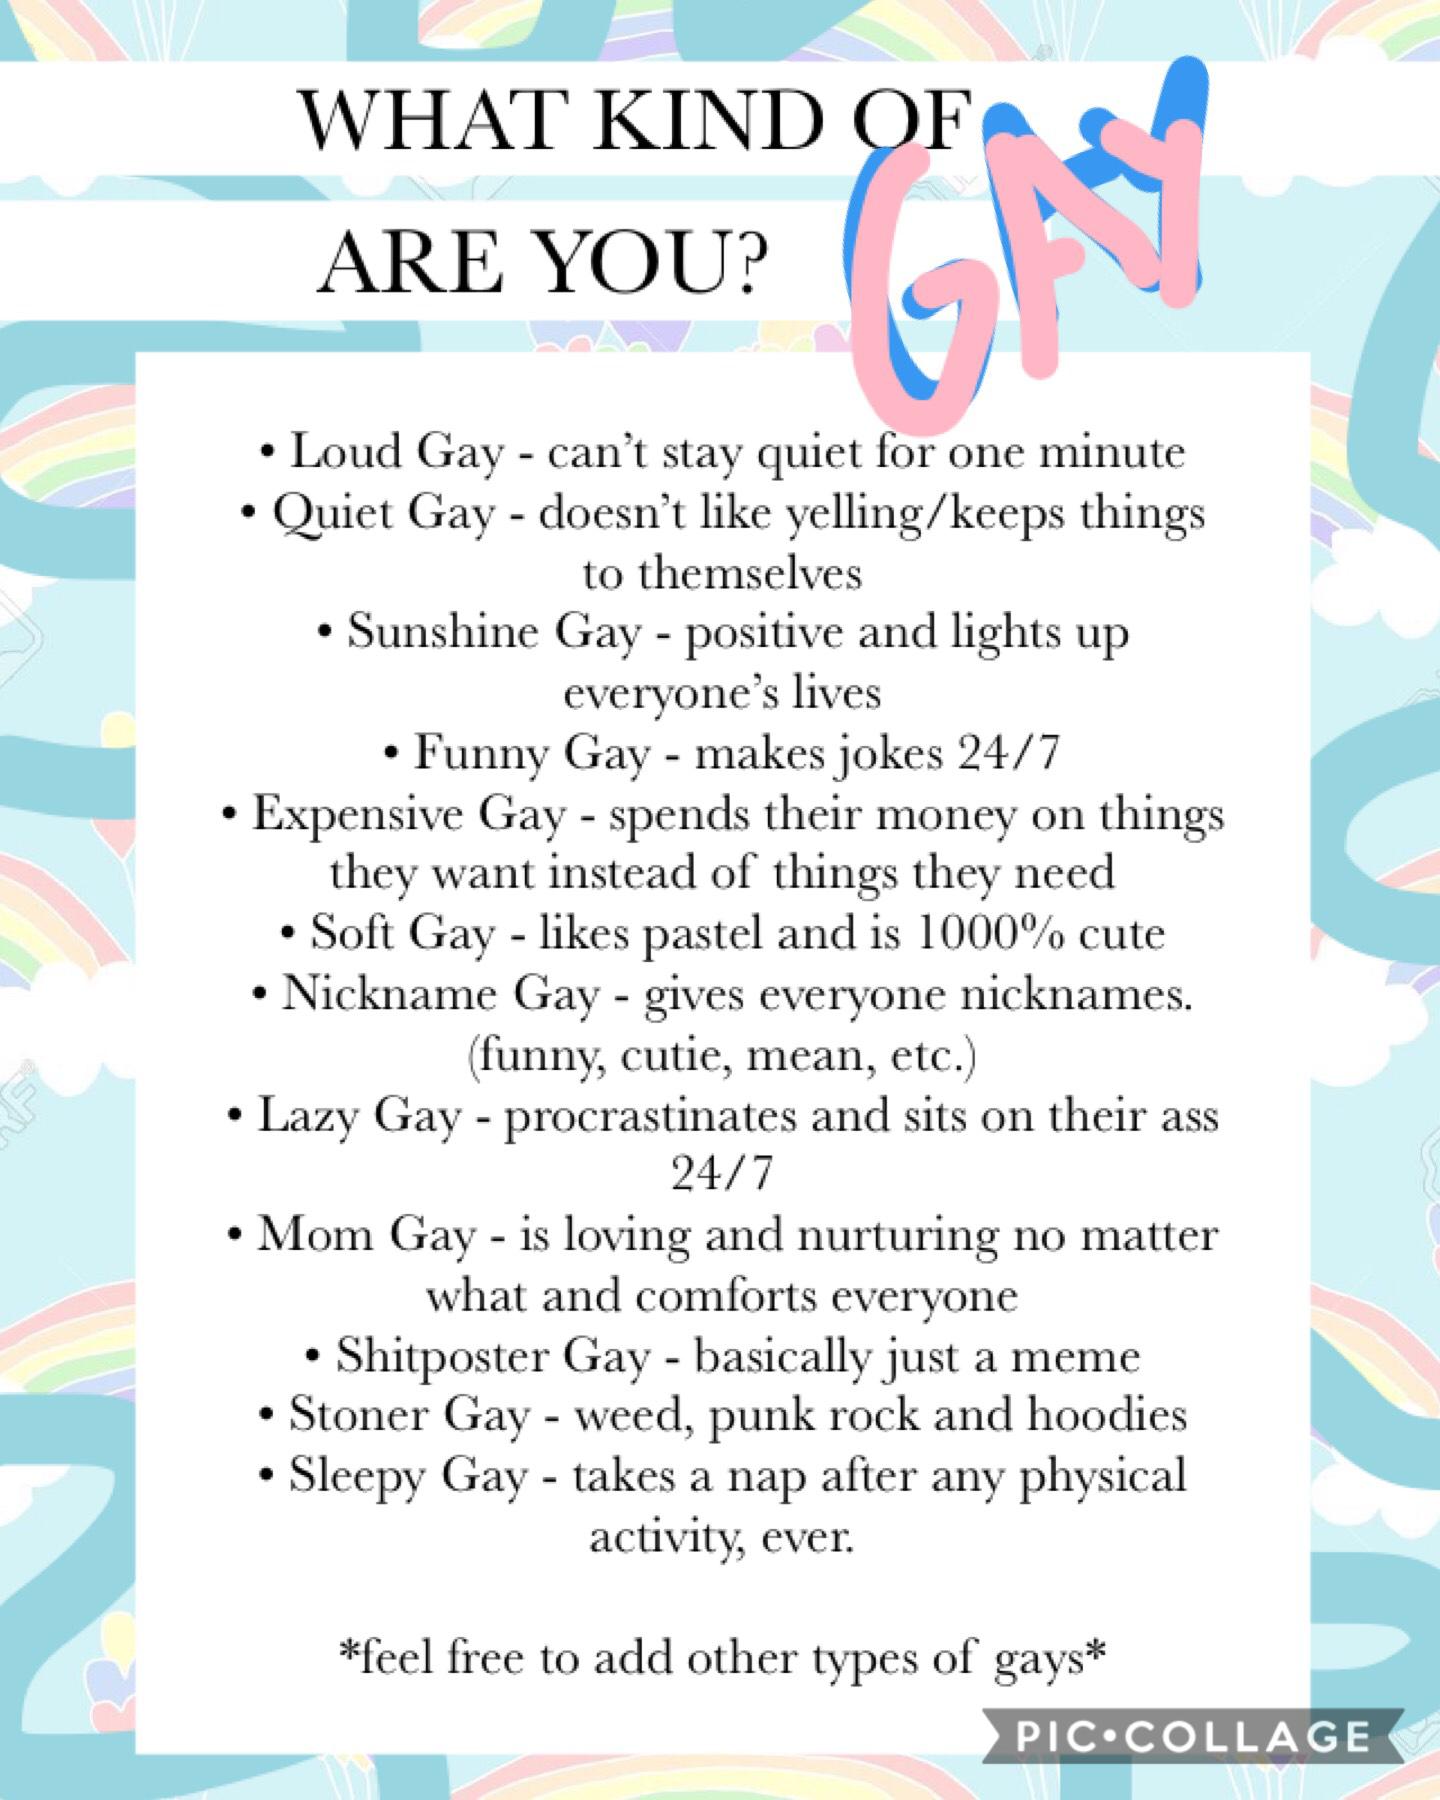 t a p


i copy and pasted this list i just thought it was really cute. 


i’m definitely a cross between a sleepy gay and a funny gay. 


WHAT KIND OF GAY ARE YOU?


<3